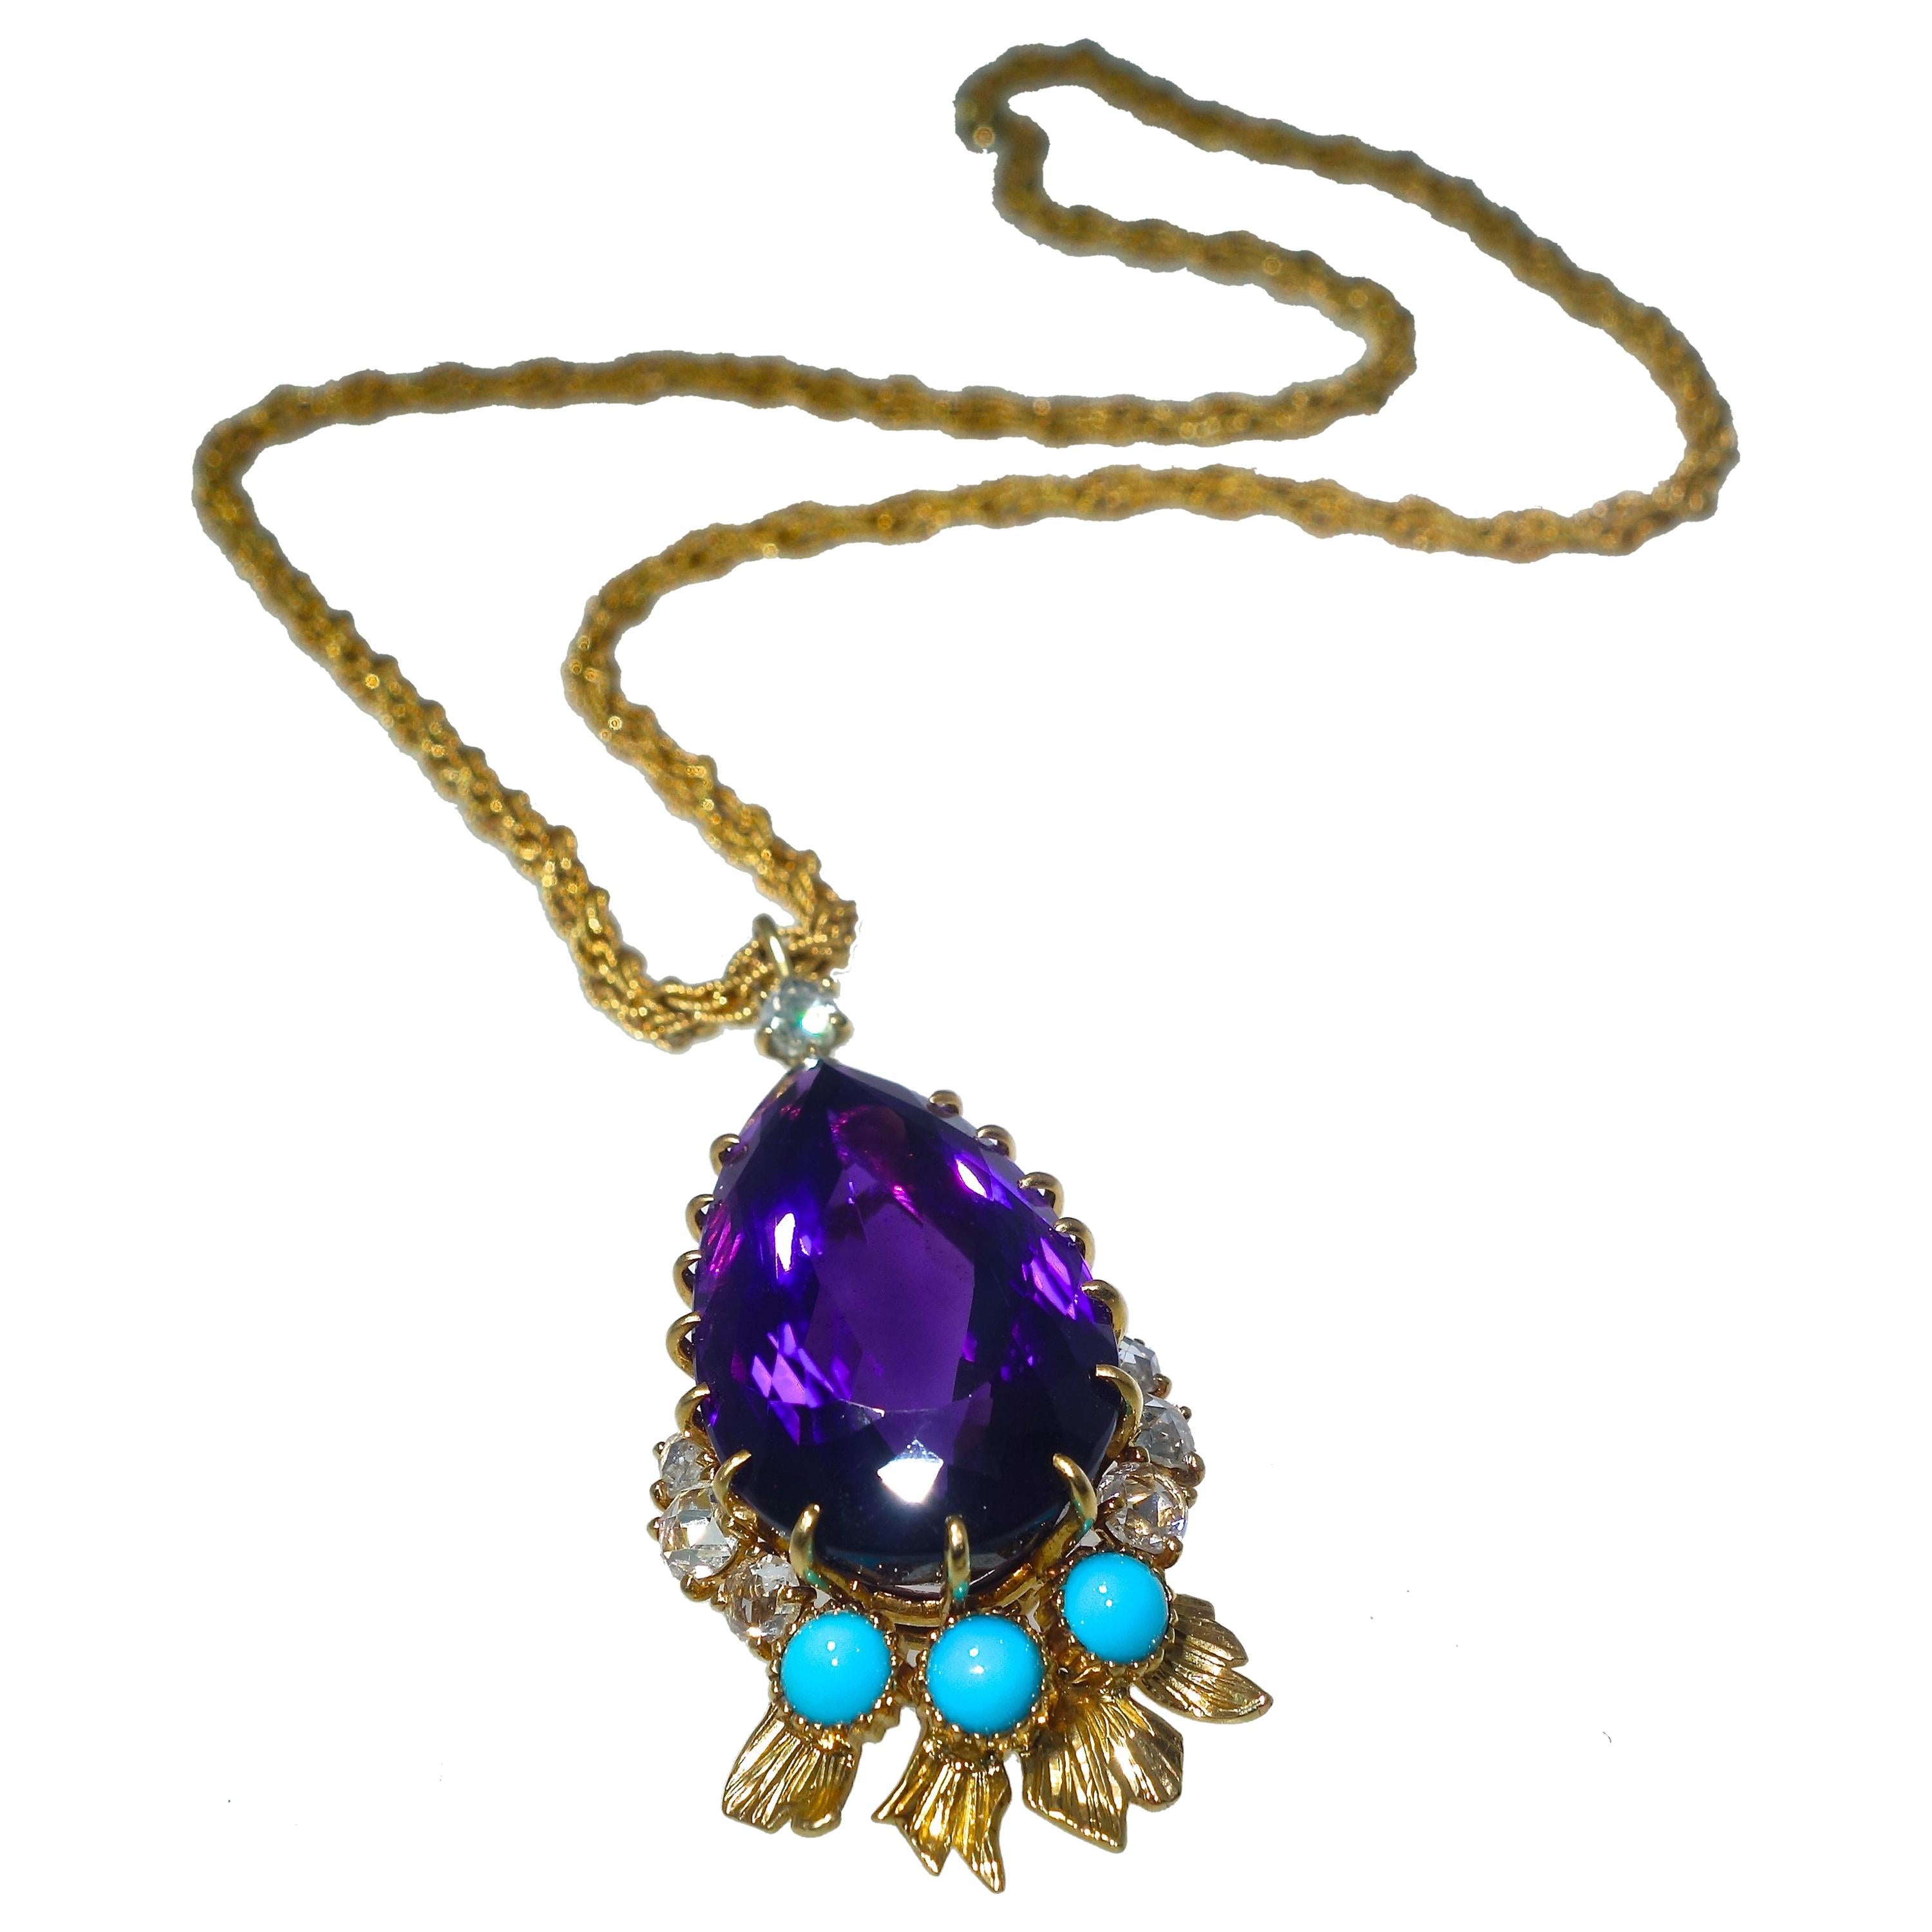 Cartier, Siberian Amethyst, Turquoise and Diamond Necklace, French, circa 1950